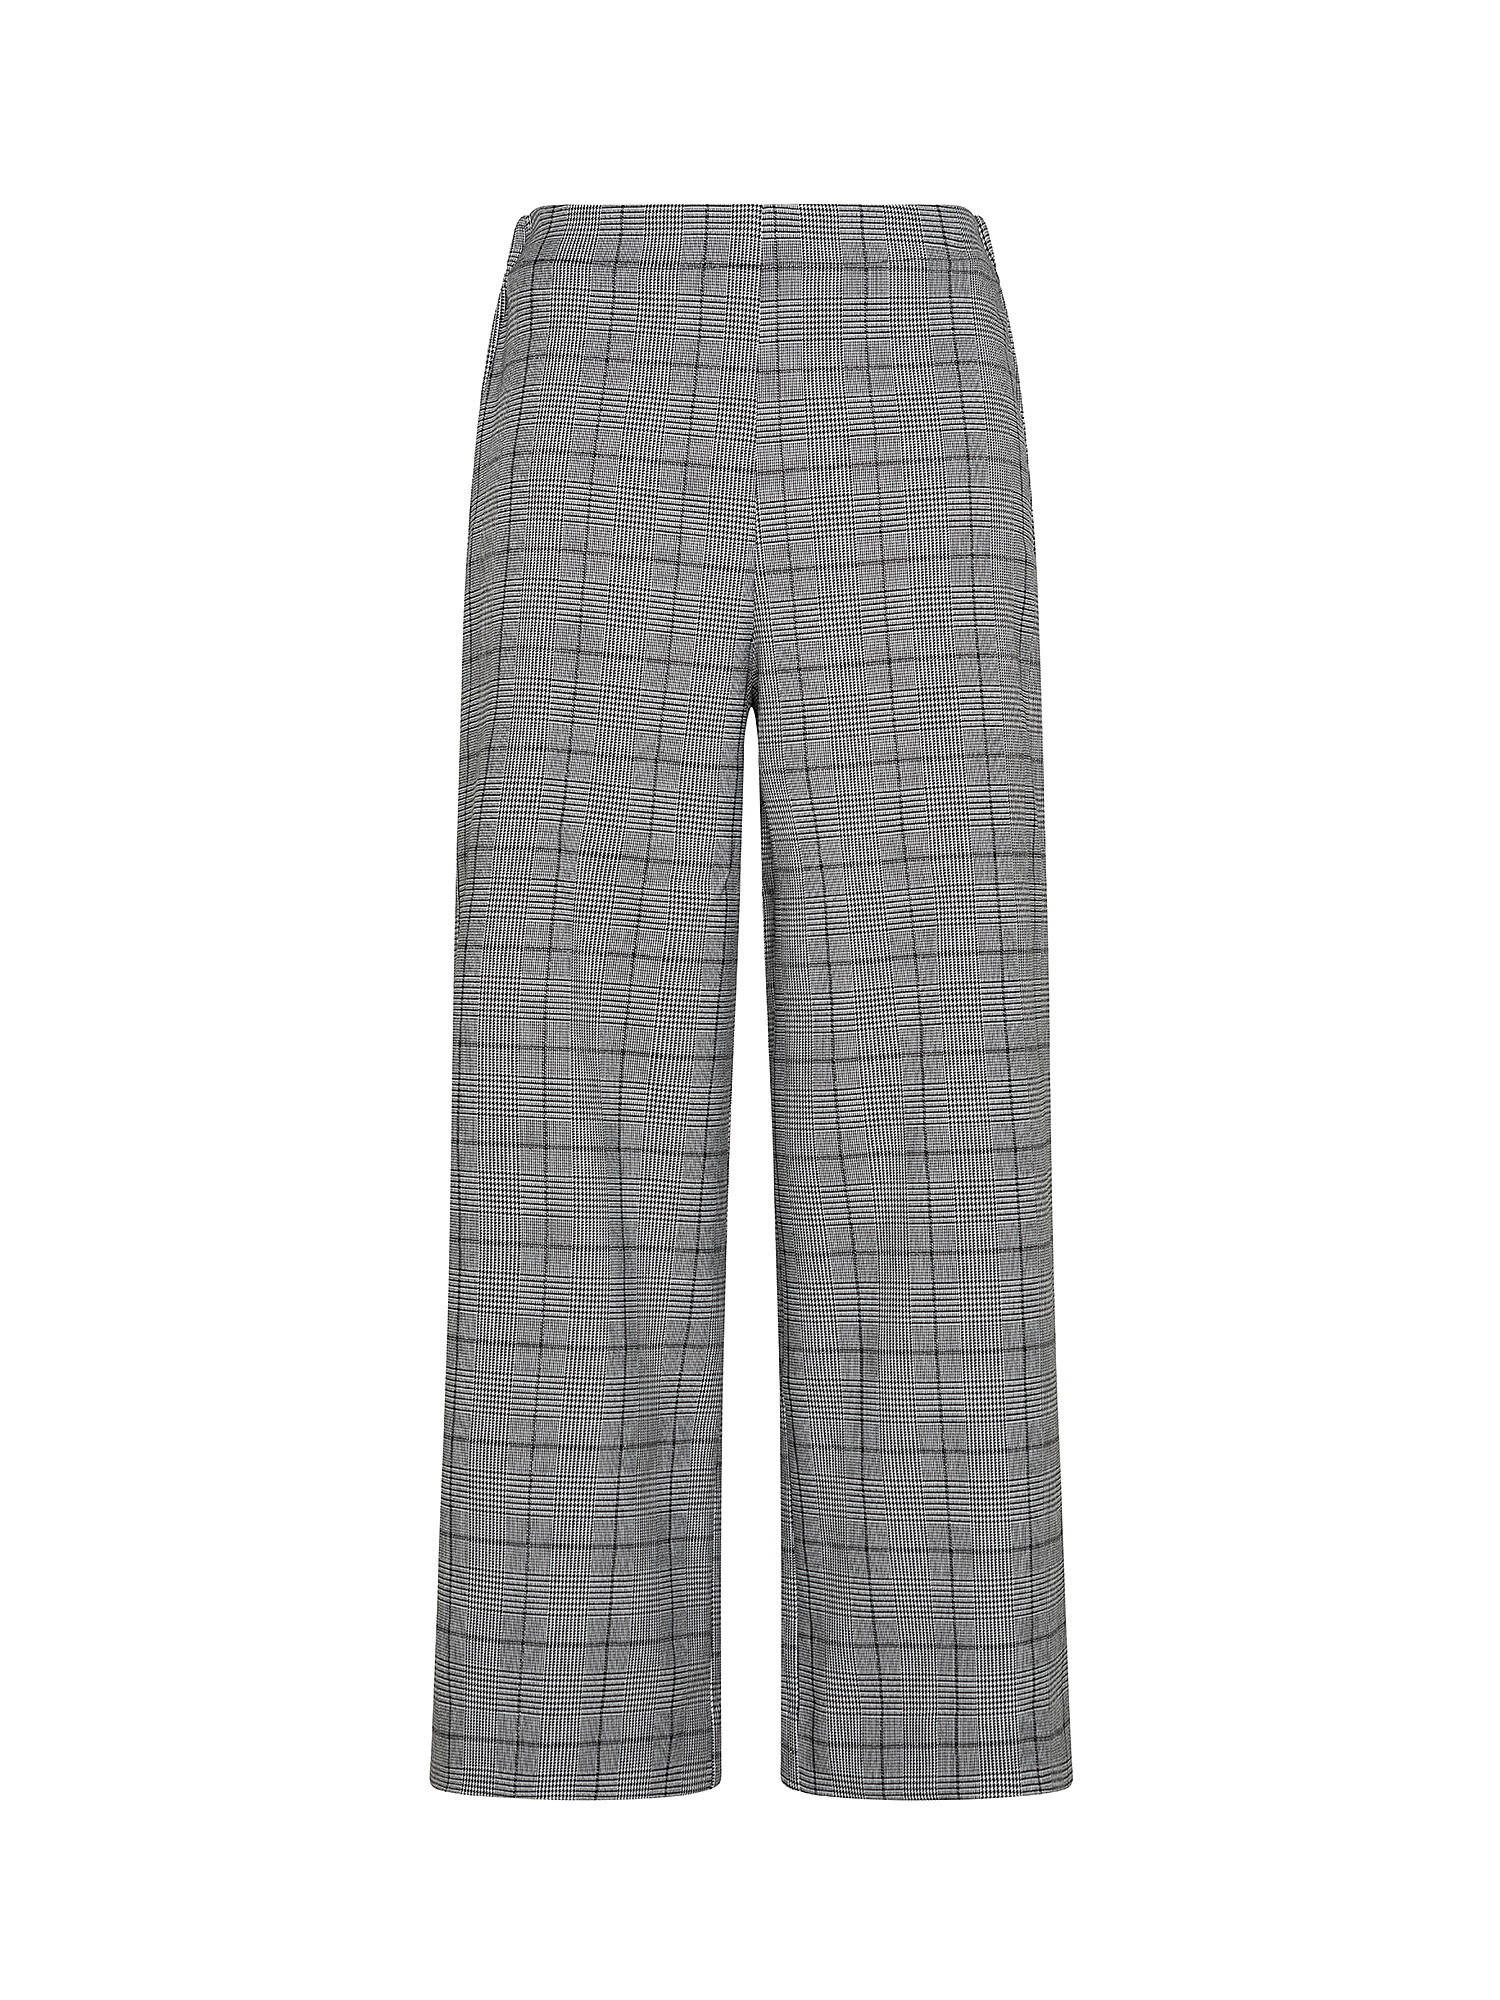 Trousers with checked pattern, Light Grey, large image number 0